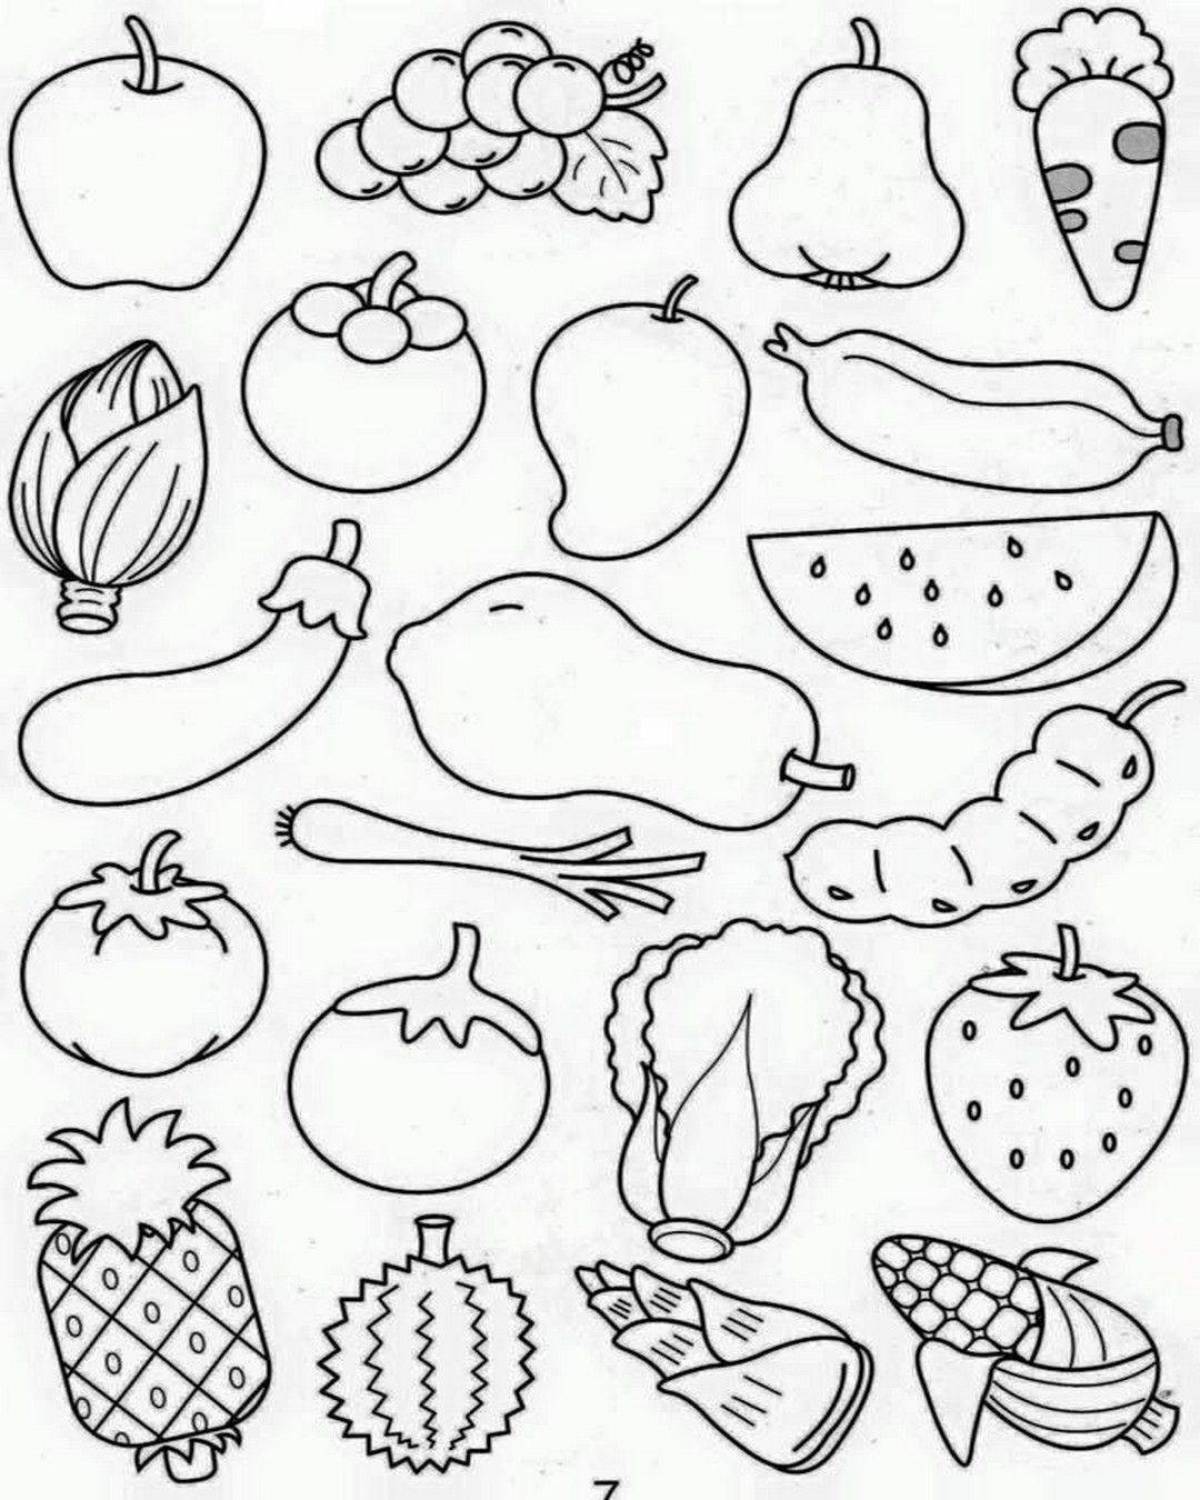 Amazing coloring pages with fruits and vegetables for kids